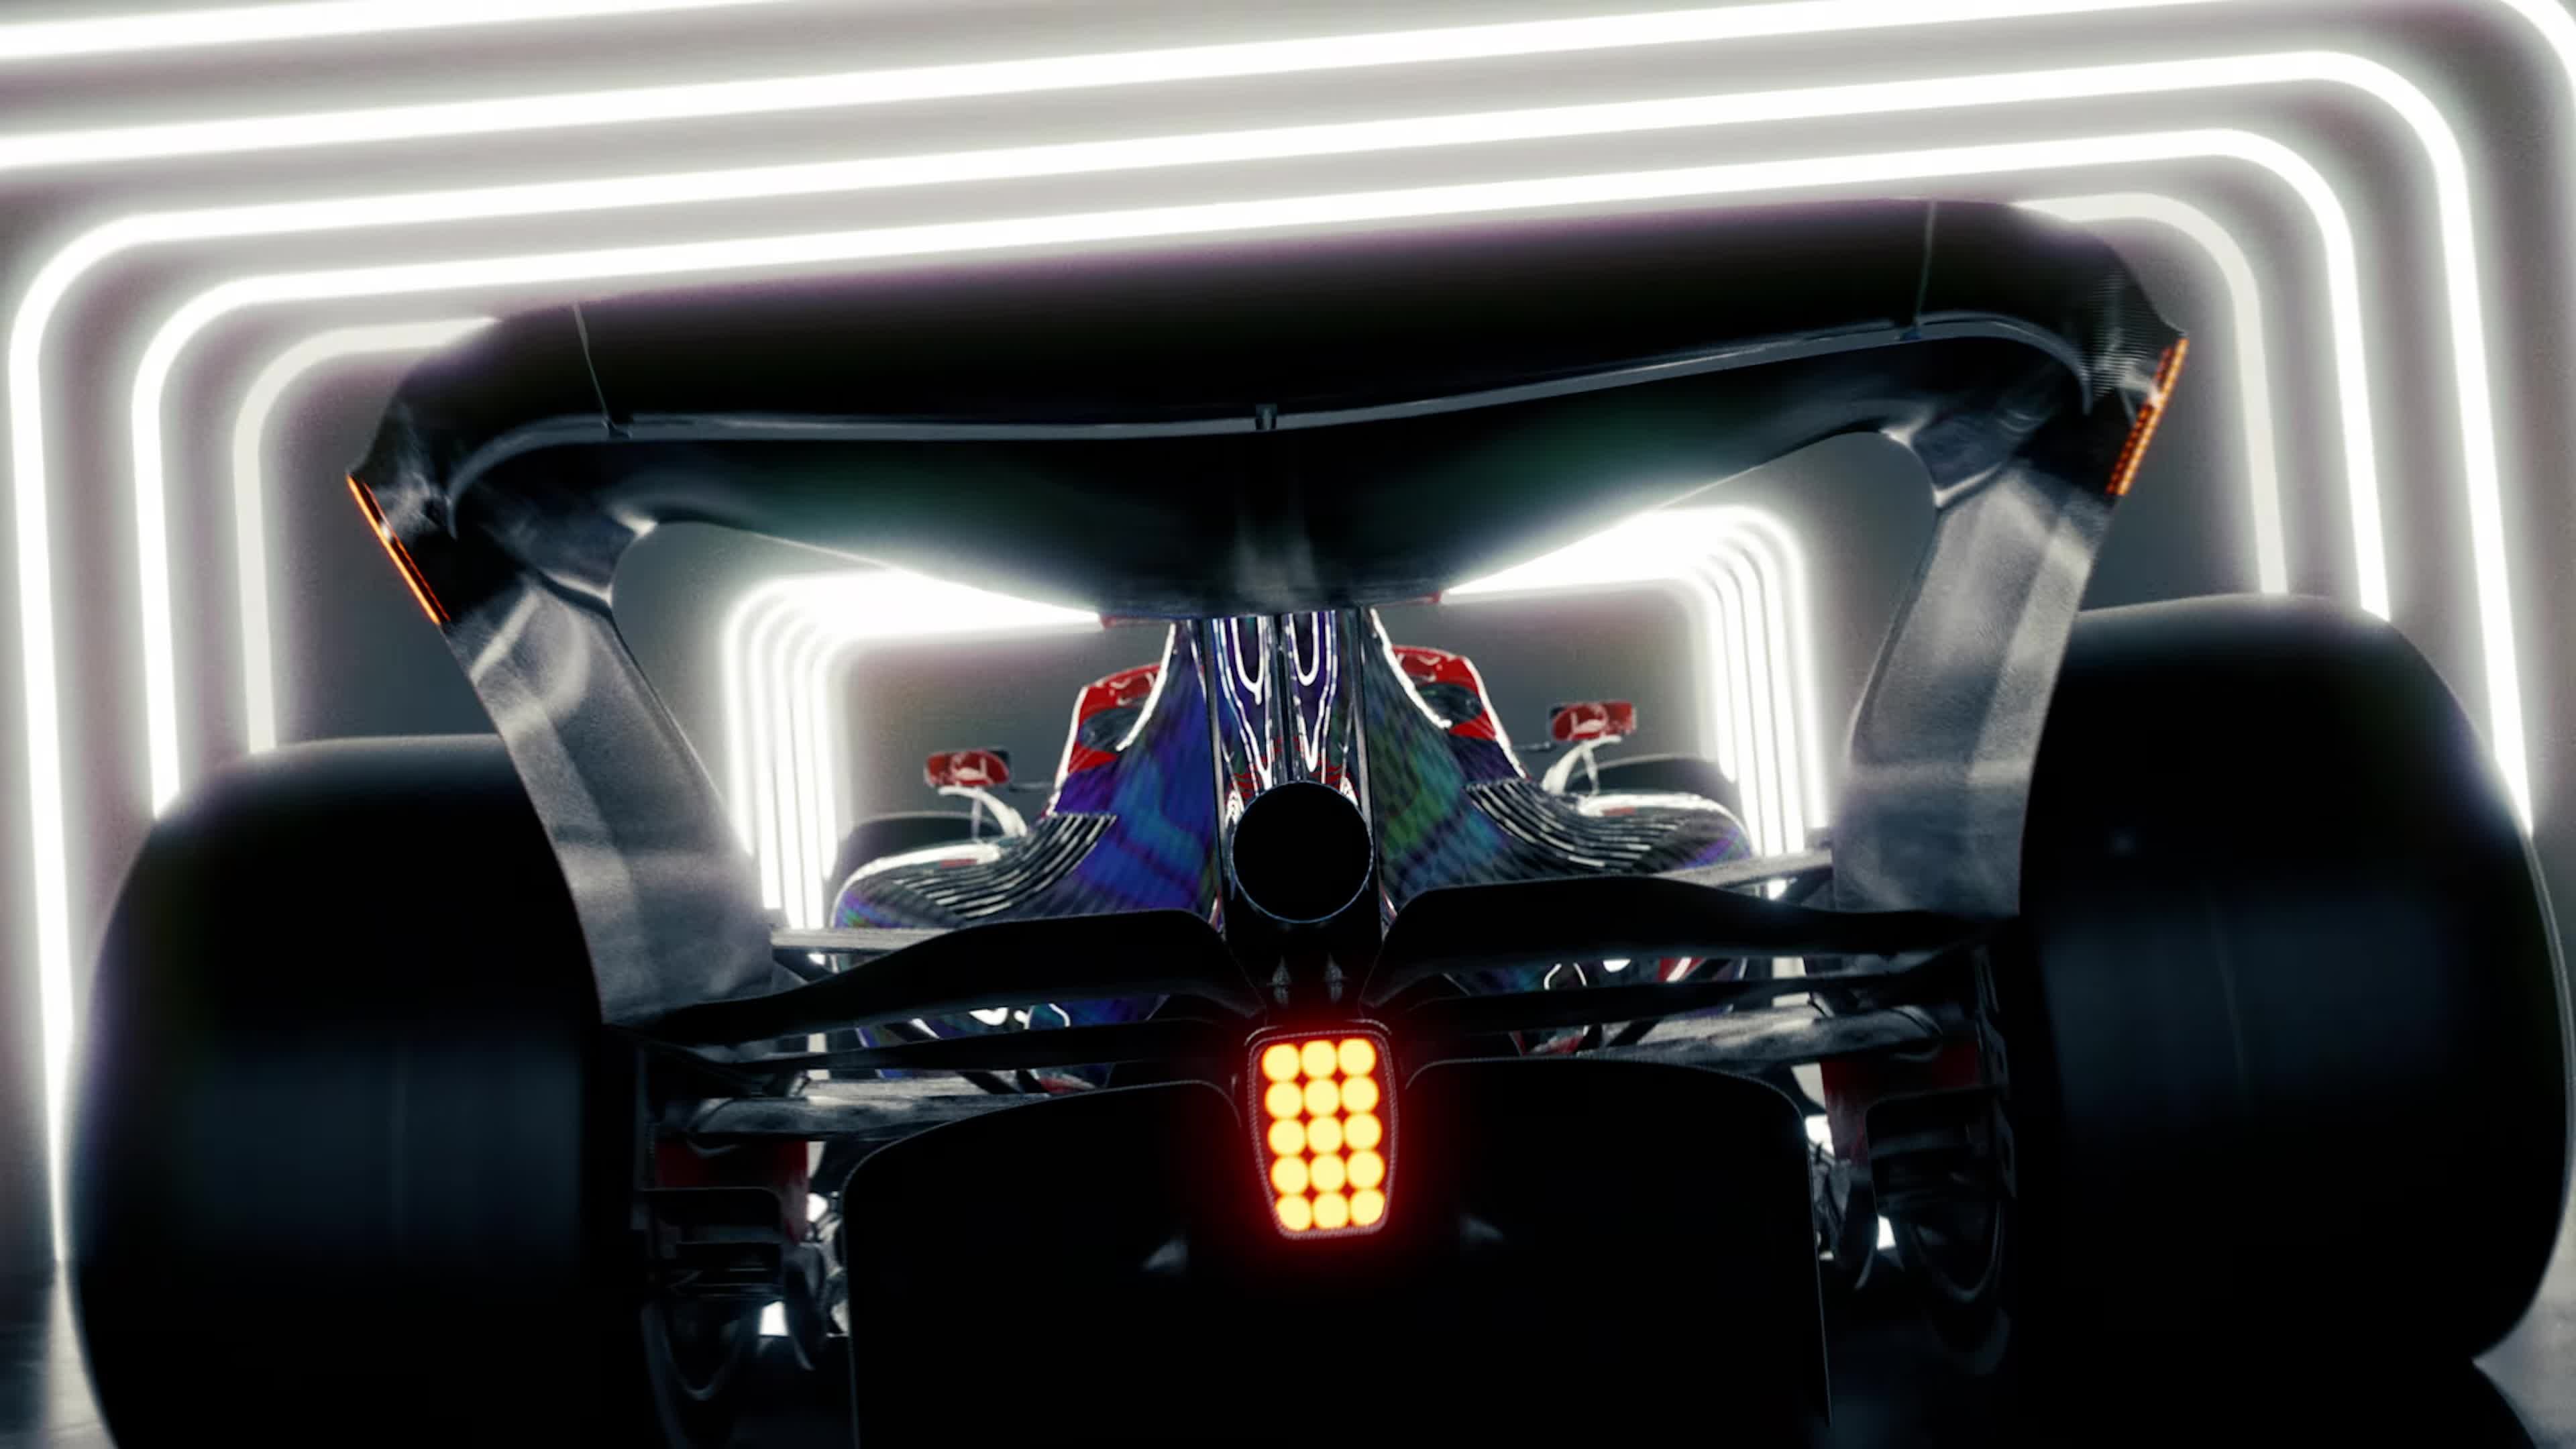 F1 2022 announced for July release on consoles and PC with VR support VG247